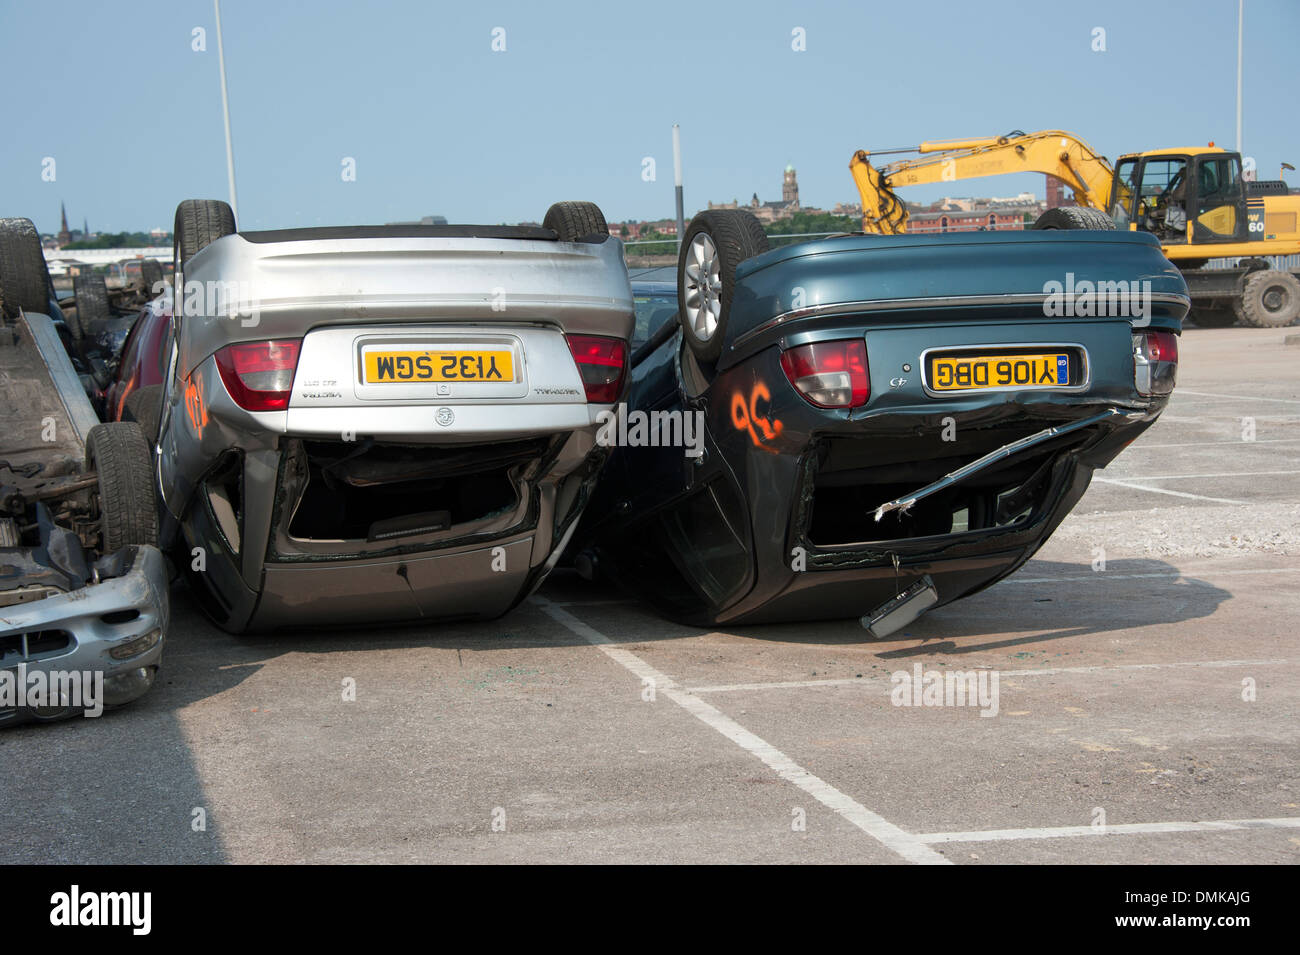 Badly Parked Cars Upside Down Bad Parking Funny Stock Photo